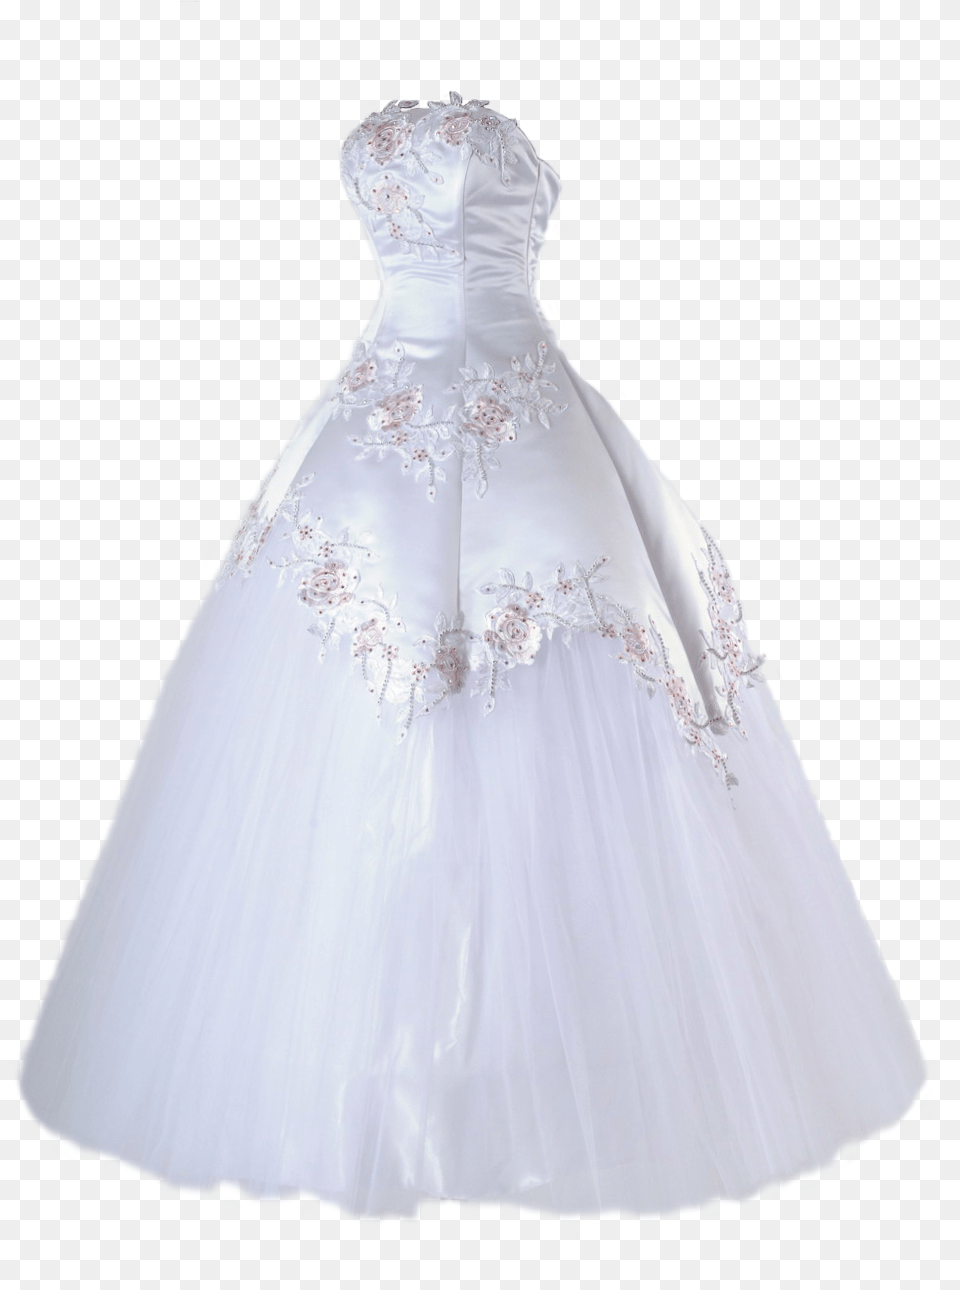 Wedding Dress Clothing Cocktail Dress, Fashion, Formal Wear, Gown, Wedding Gown Png Image